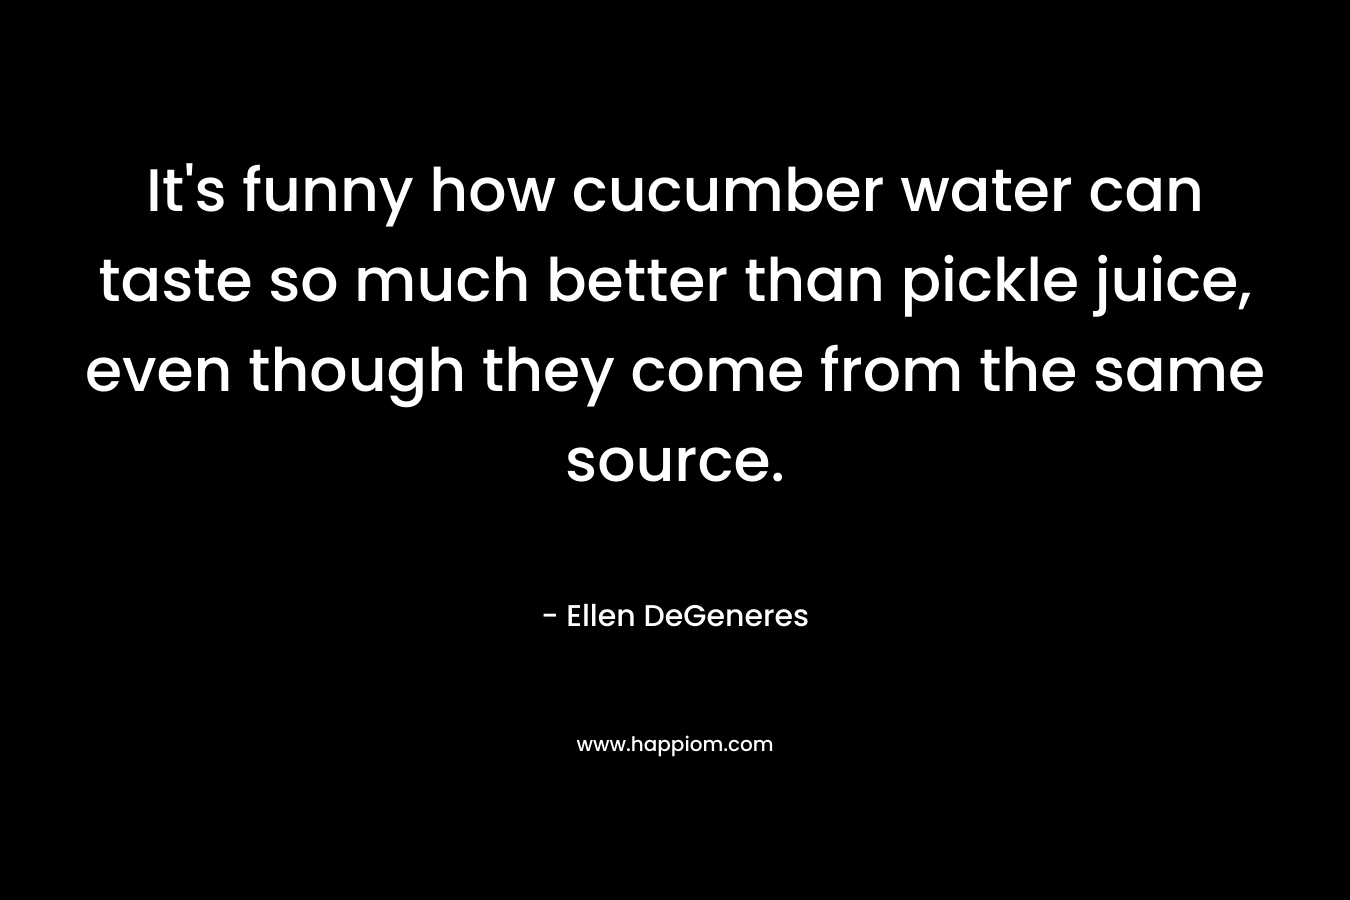 It's funny how cucumber water can taste so much better than pickle juice, even though they come from the same source.